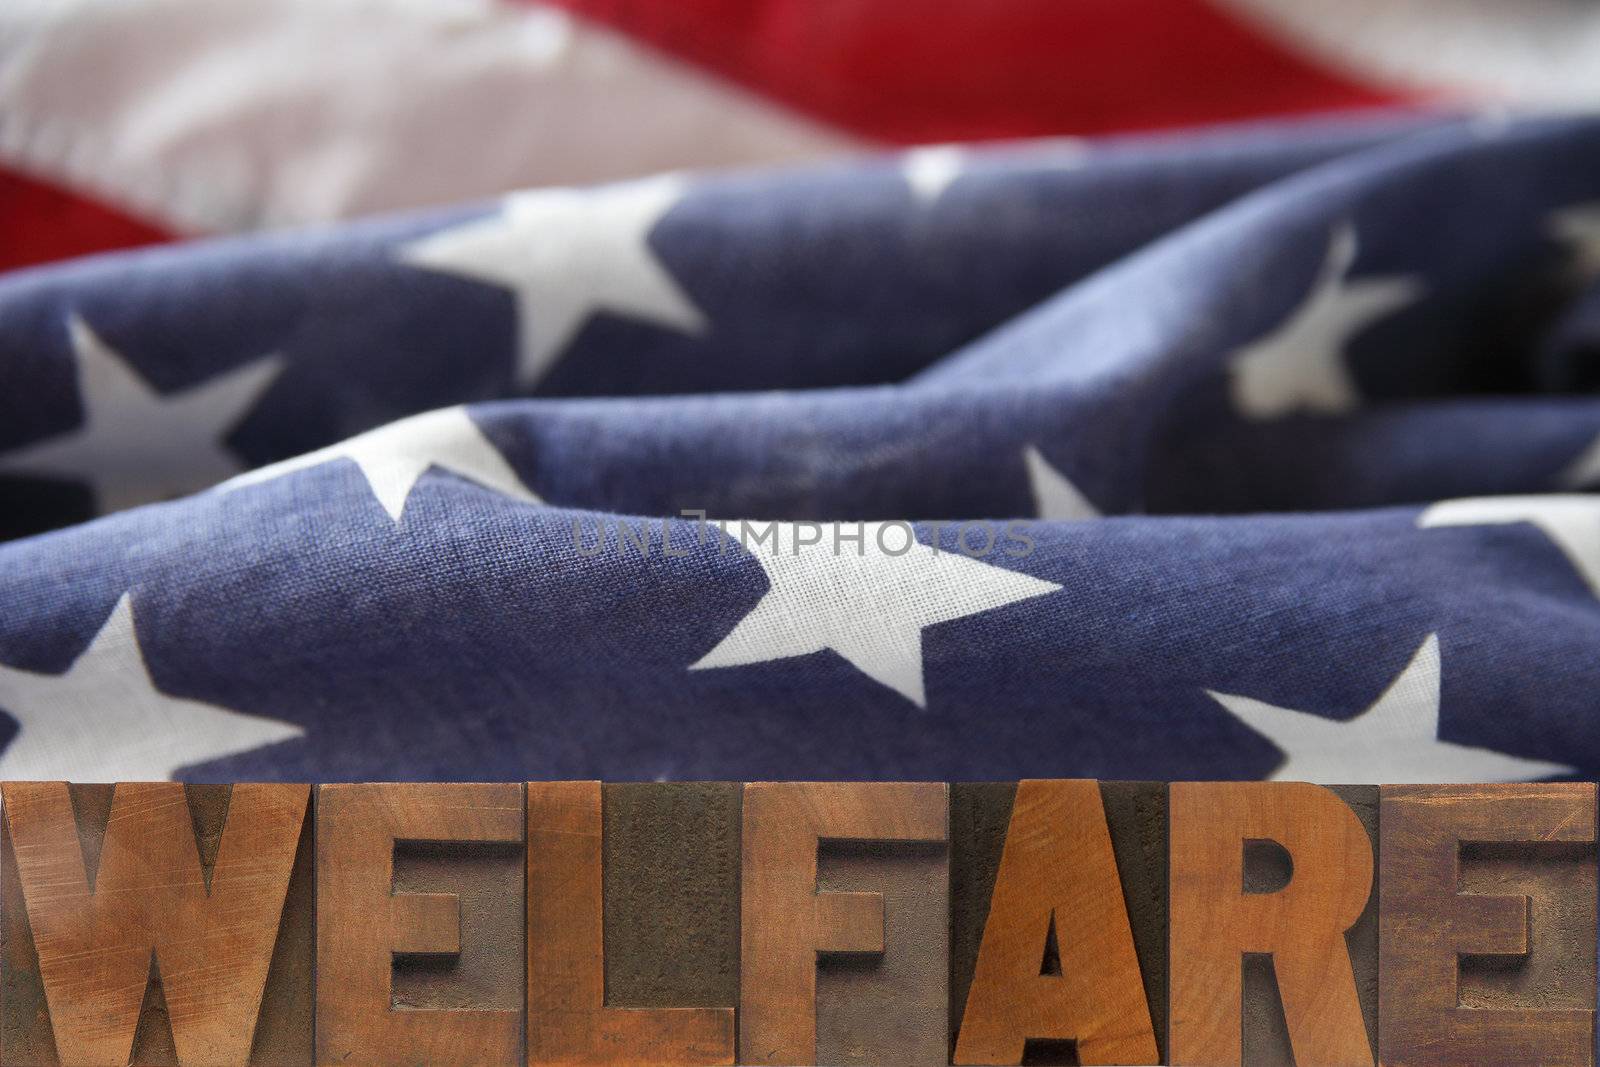 the word welfare on an American flag background